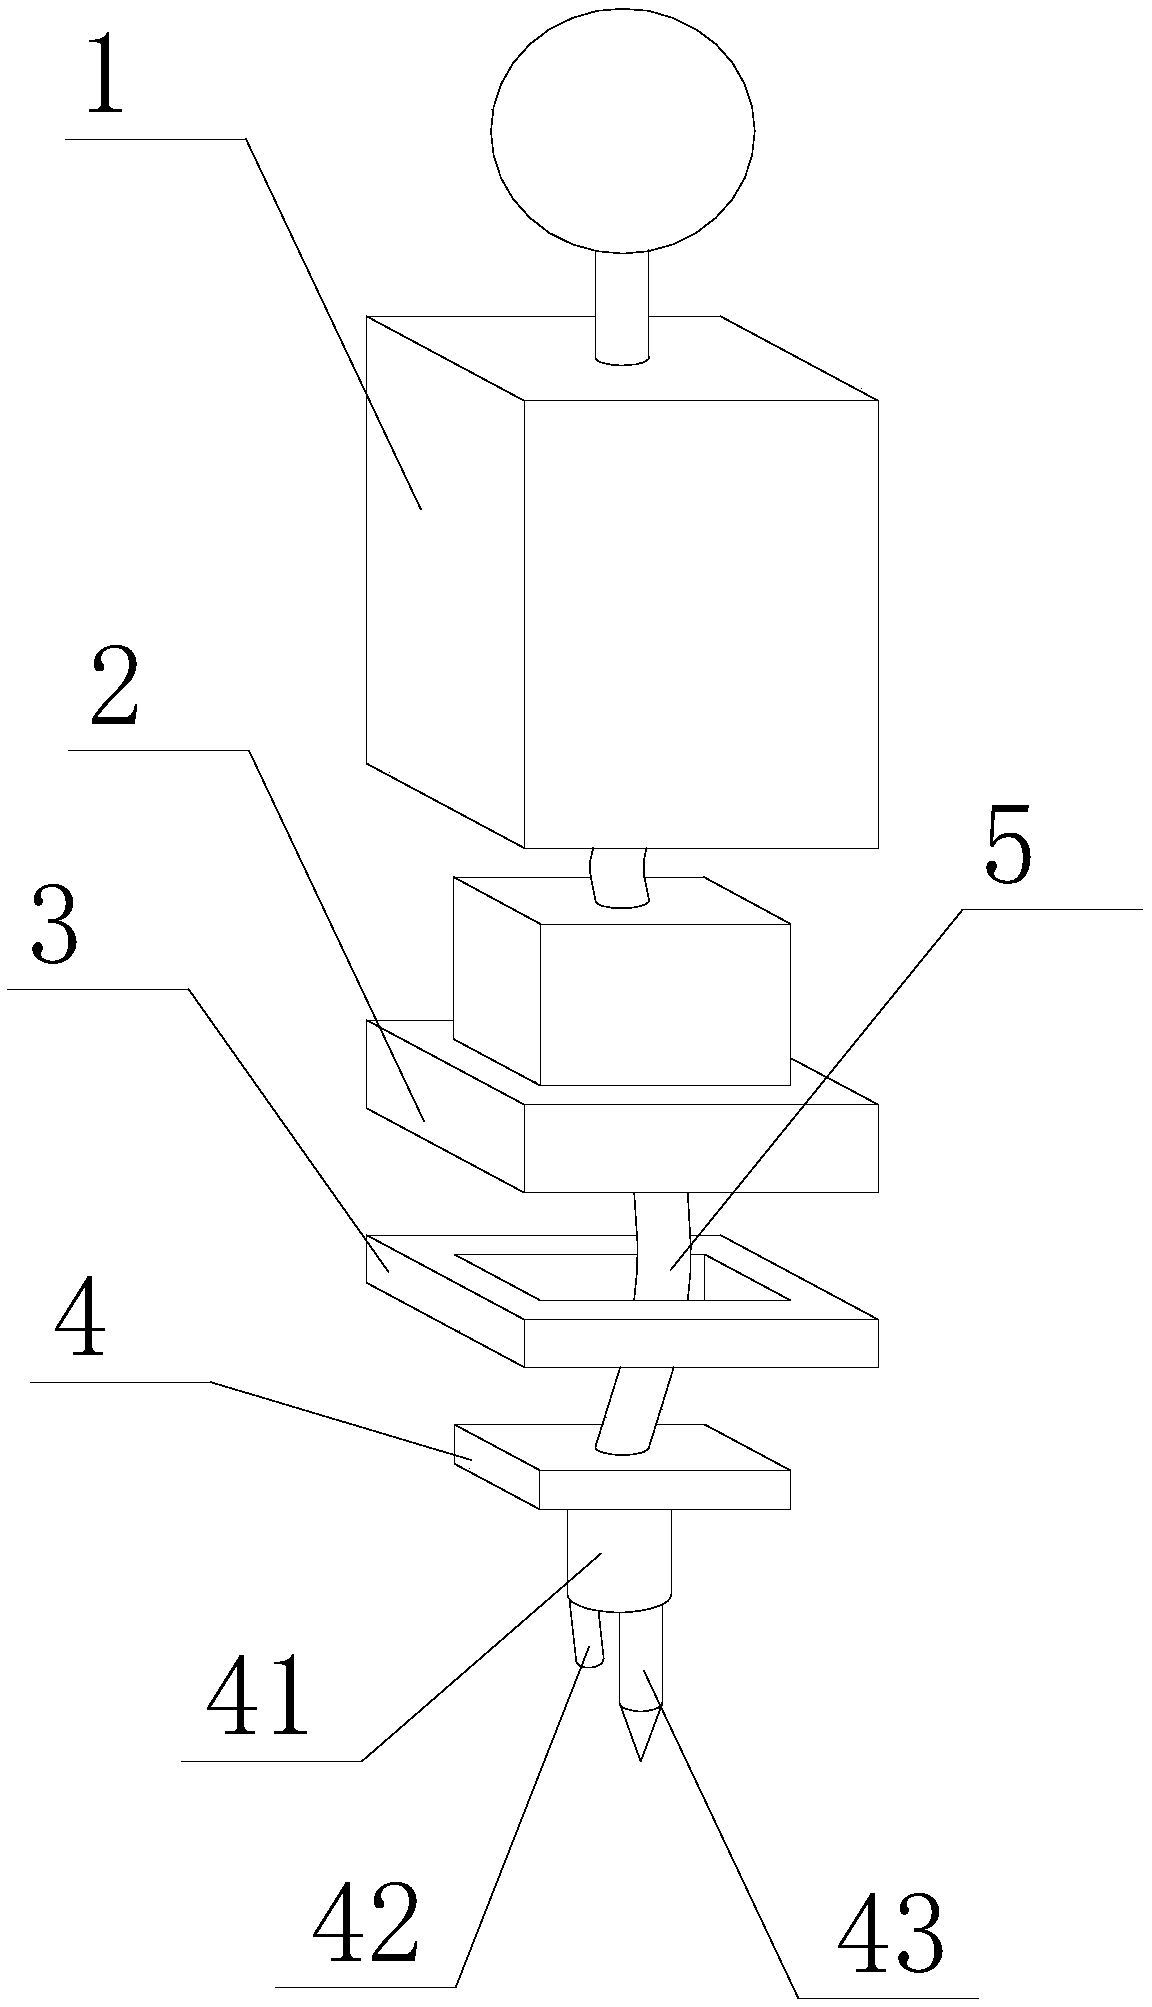 Method for enabling patient with Parkinson's disease to write